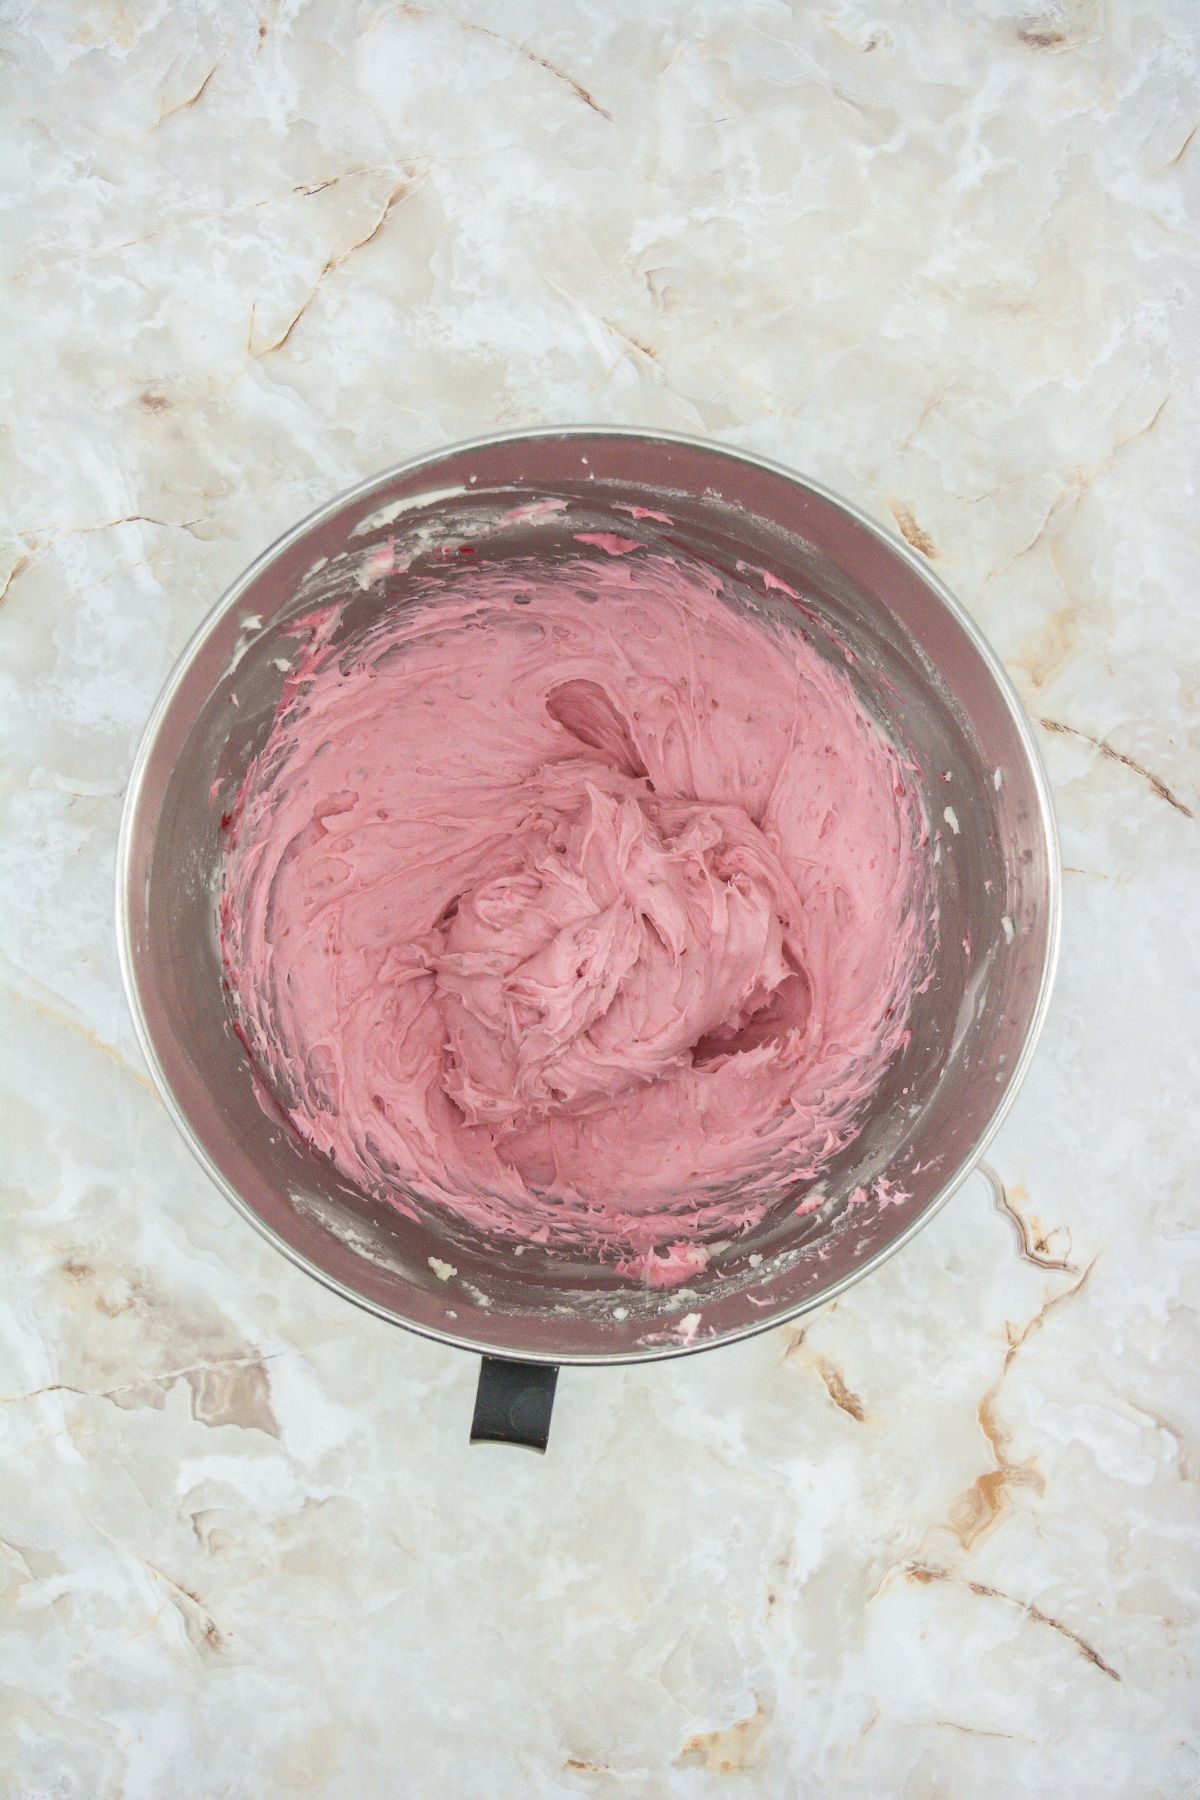 Raspberry frosting in a mixing bowl.